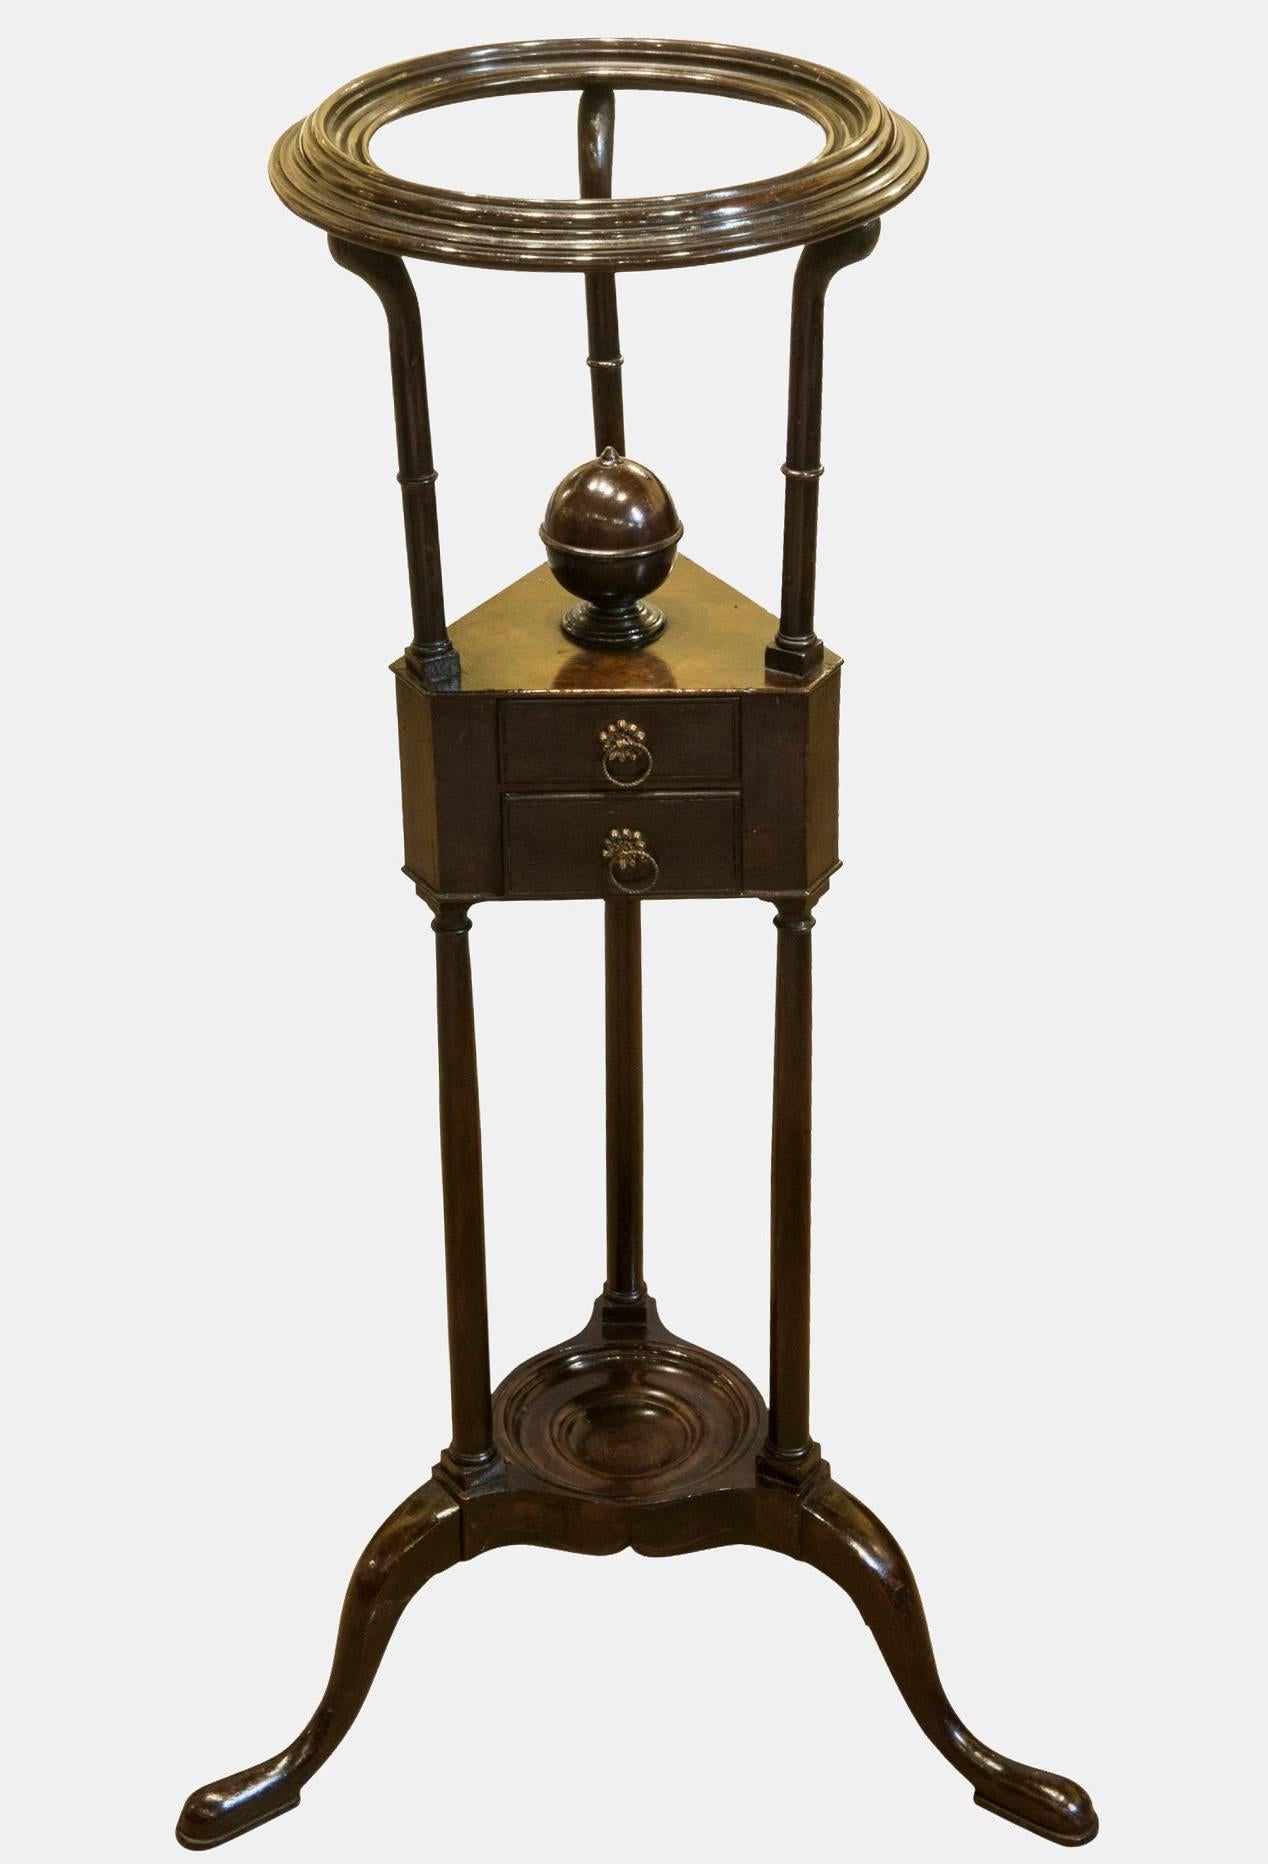 A mahogany wig powdering stand in its original condition.